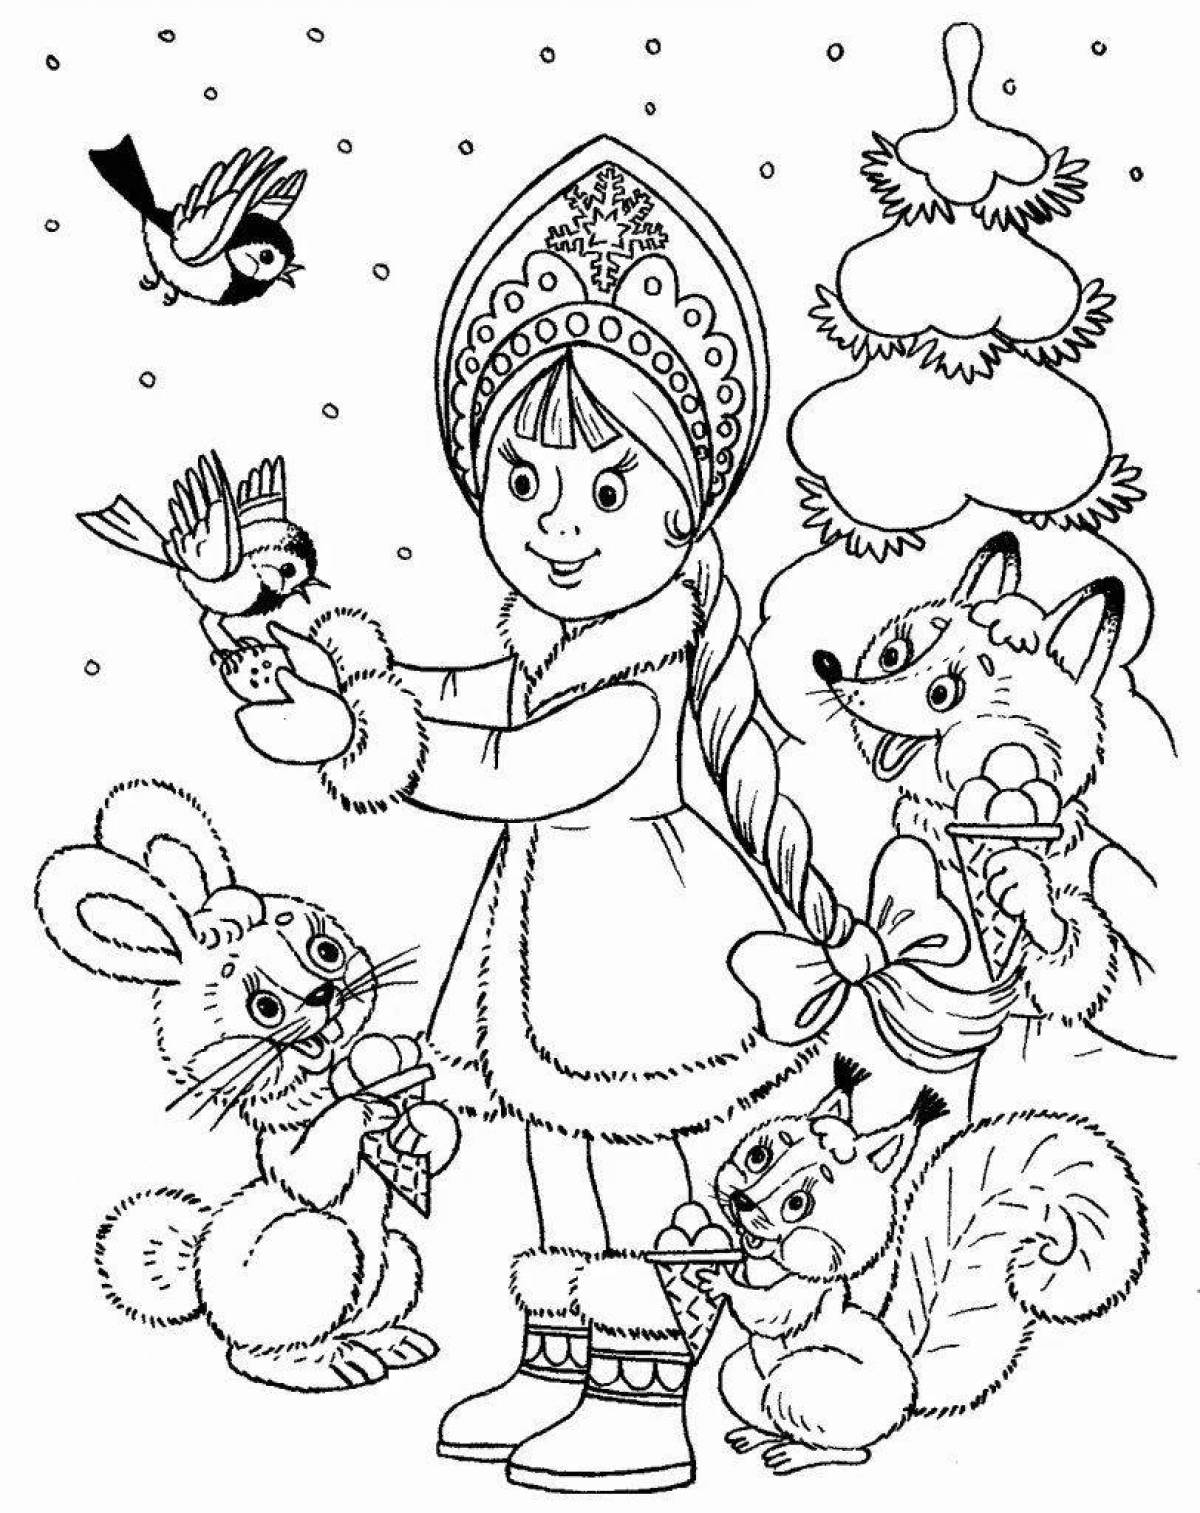 Charming snowman and fox coloring book